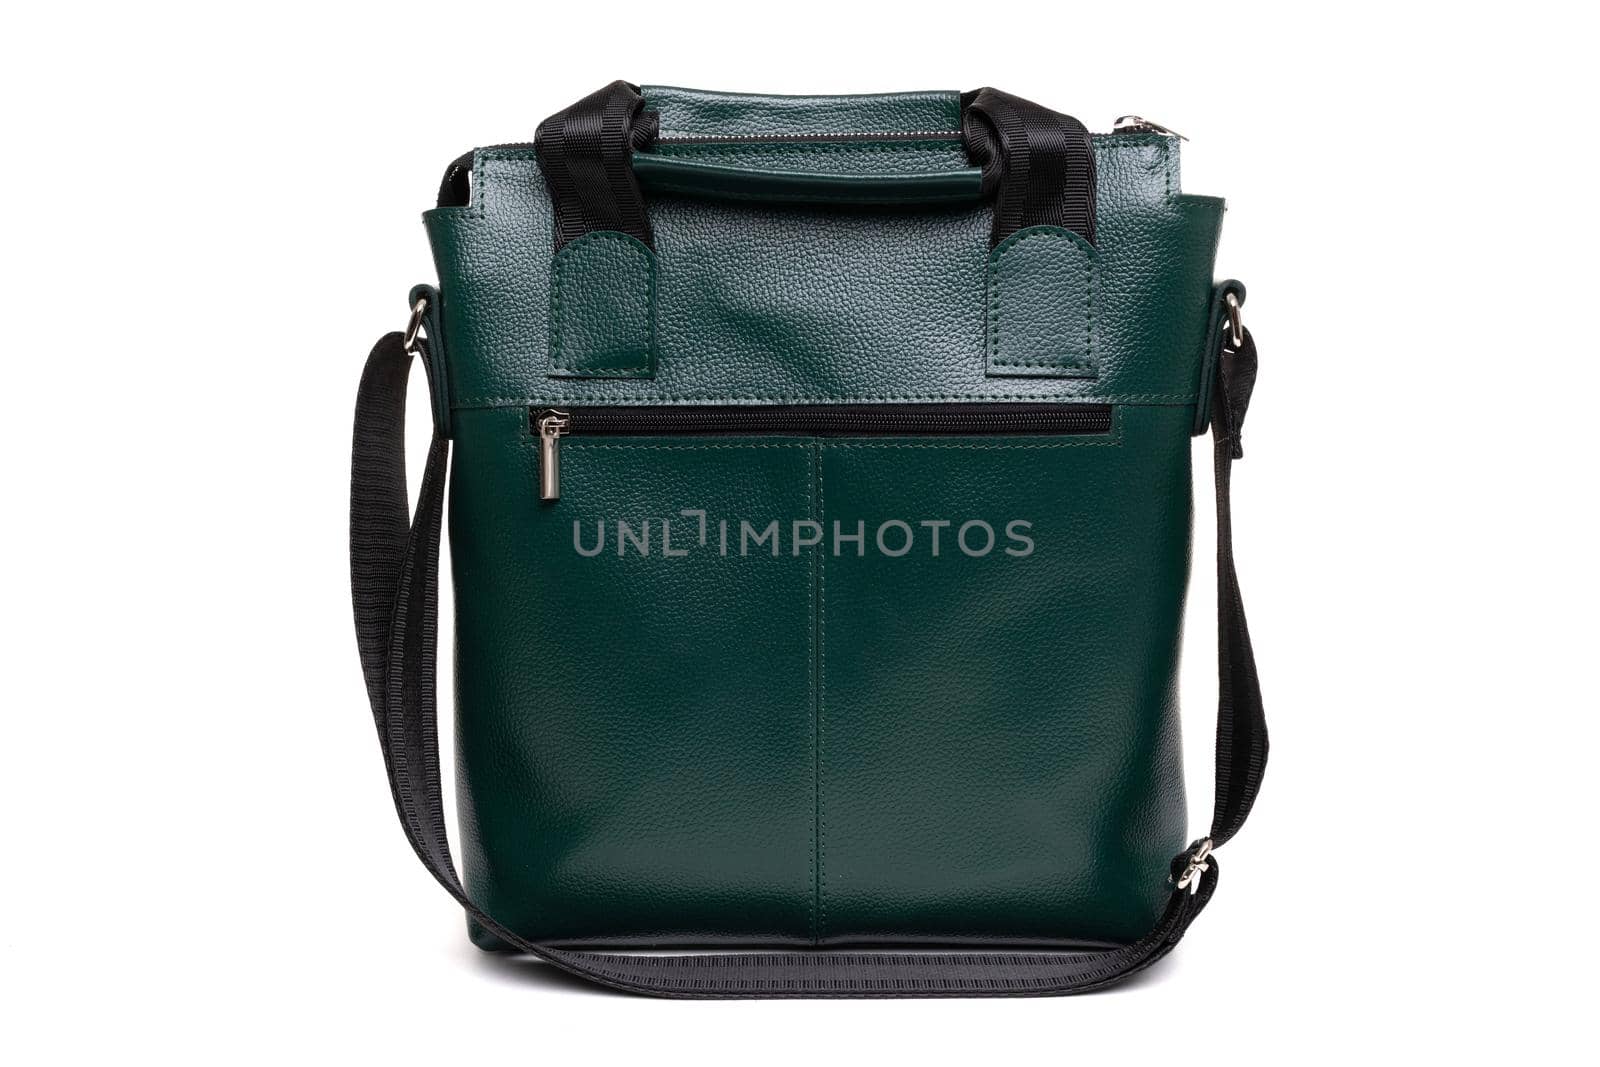 rectangular men's leather bag of dark green color on a white background.